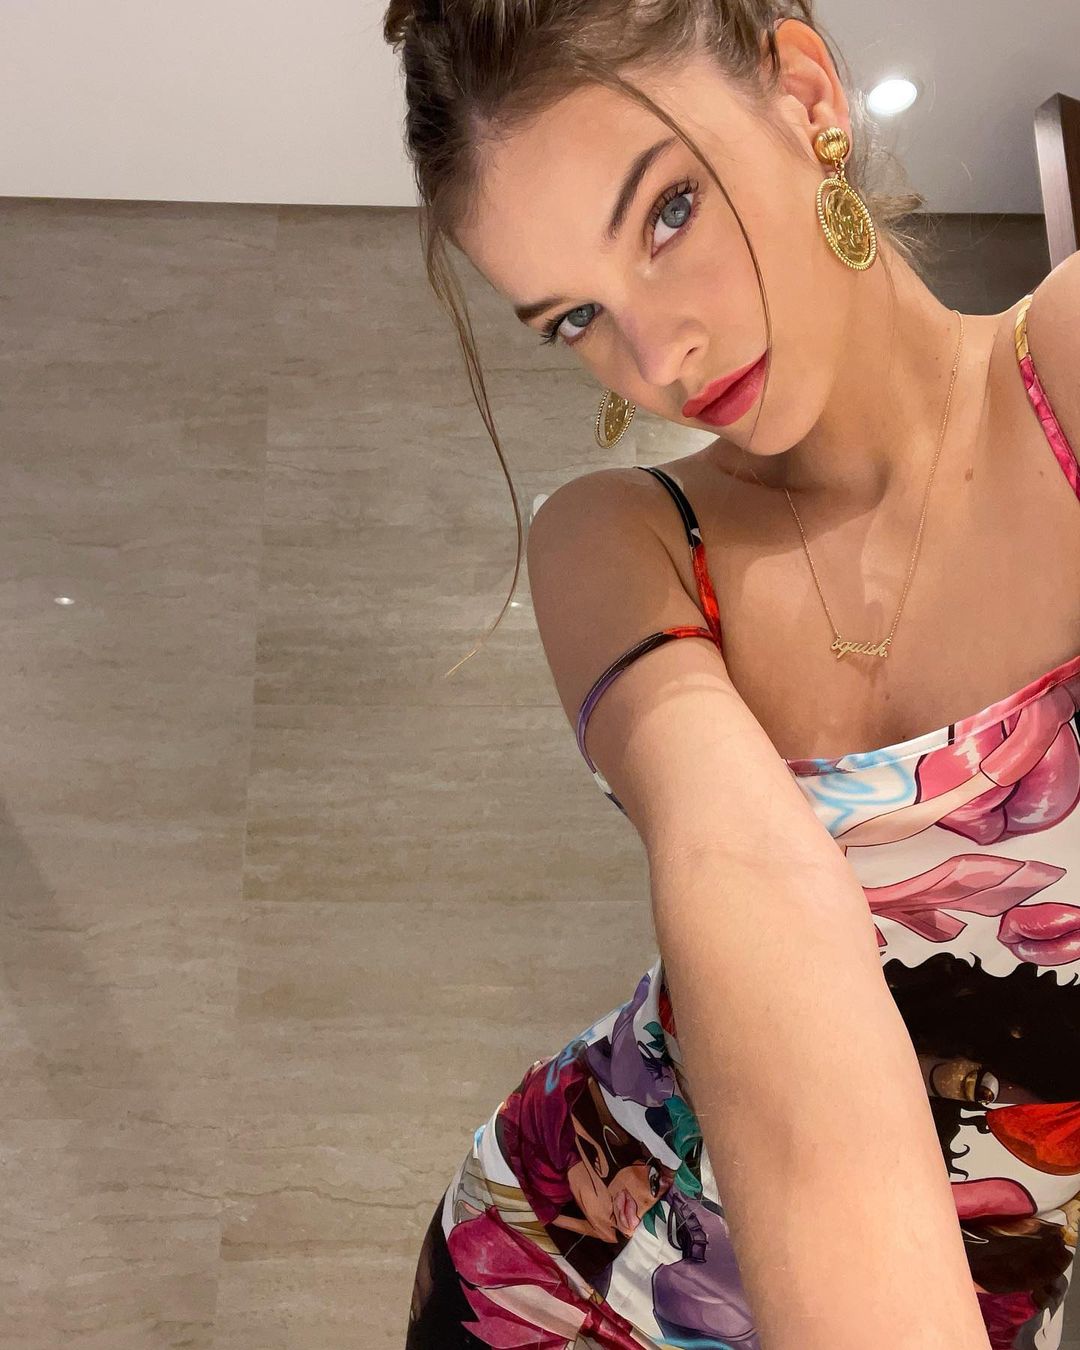 Barbara Palvin is Ready for Date Night!